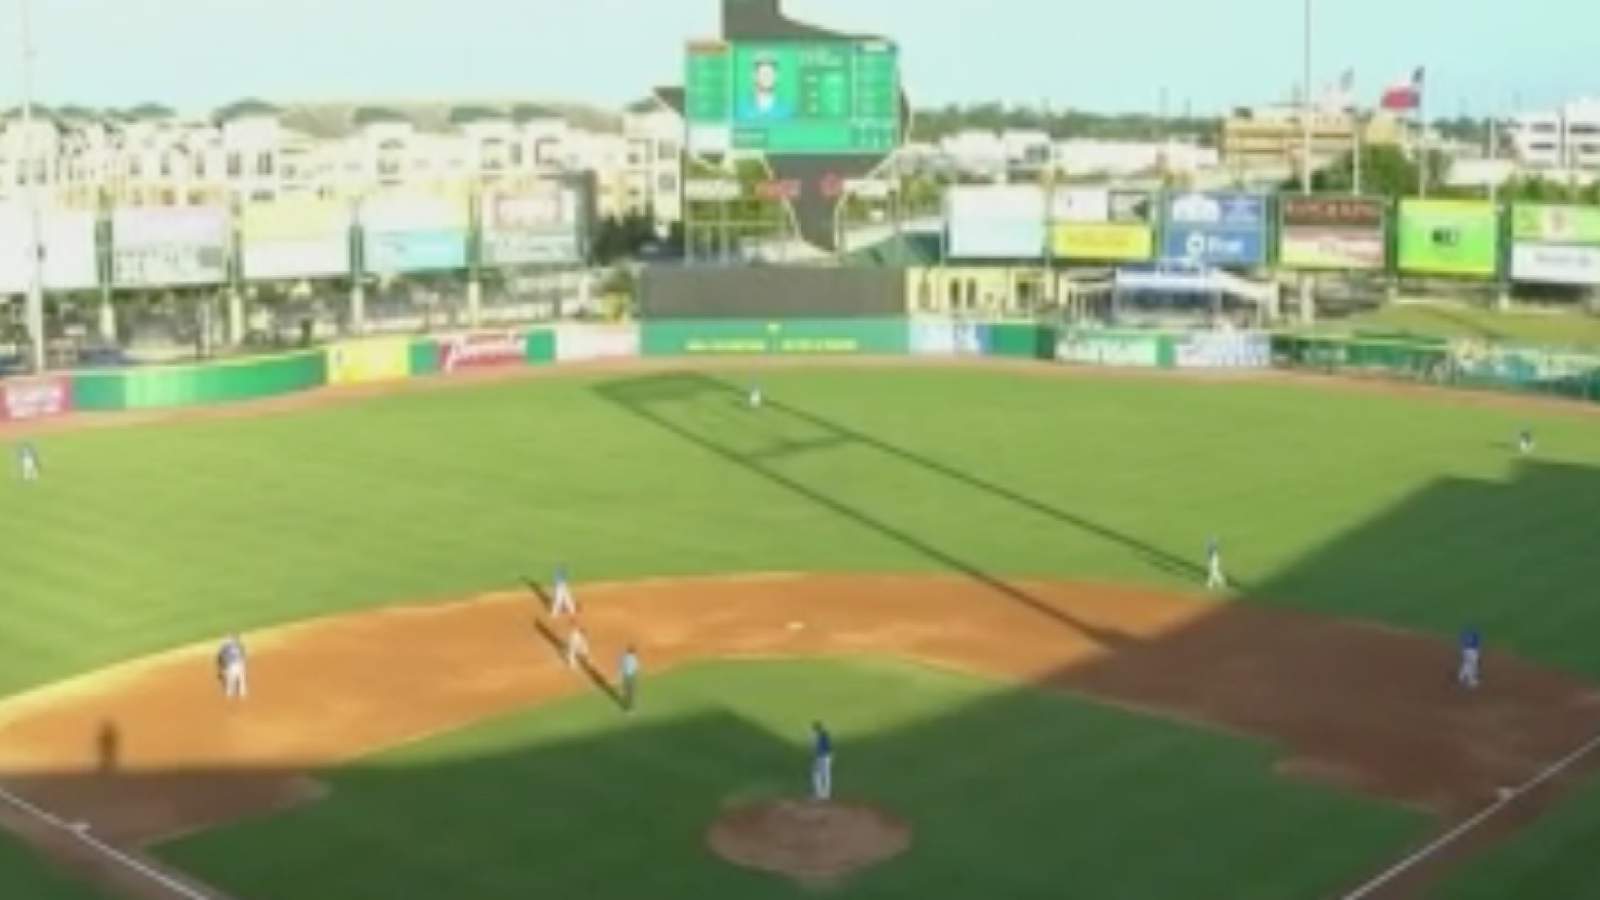 Fans watch first in-person baseball game amid COVID-19 pandemic in Sugar Land